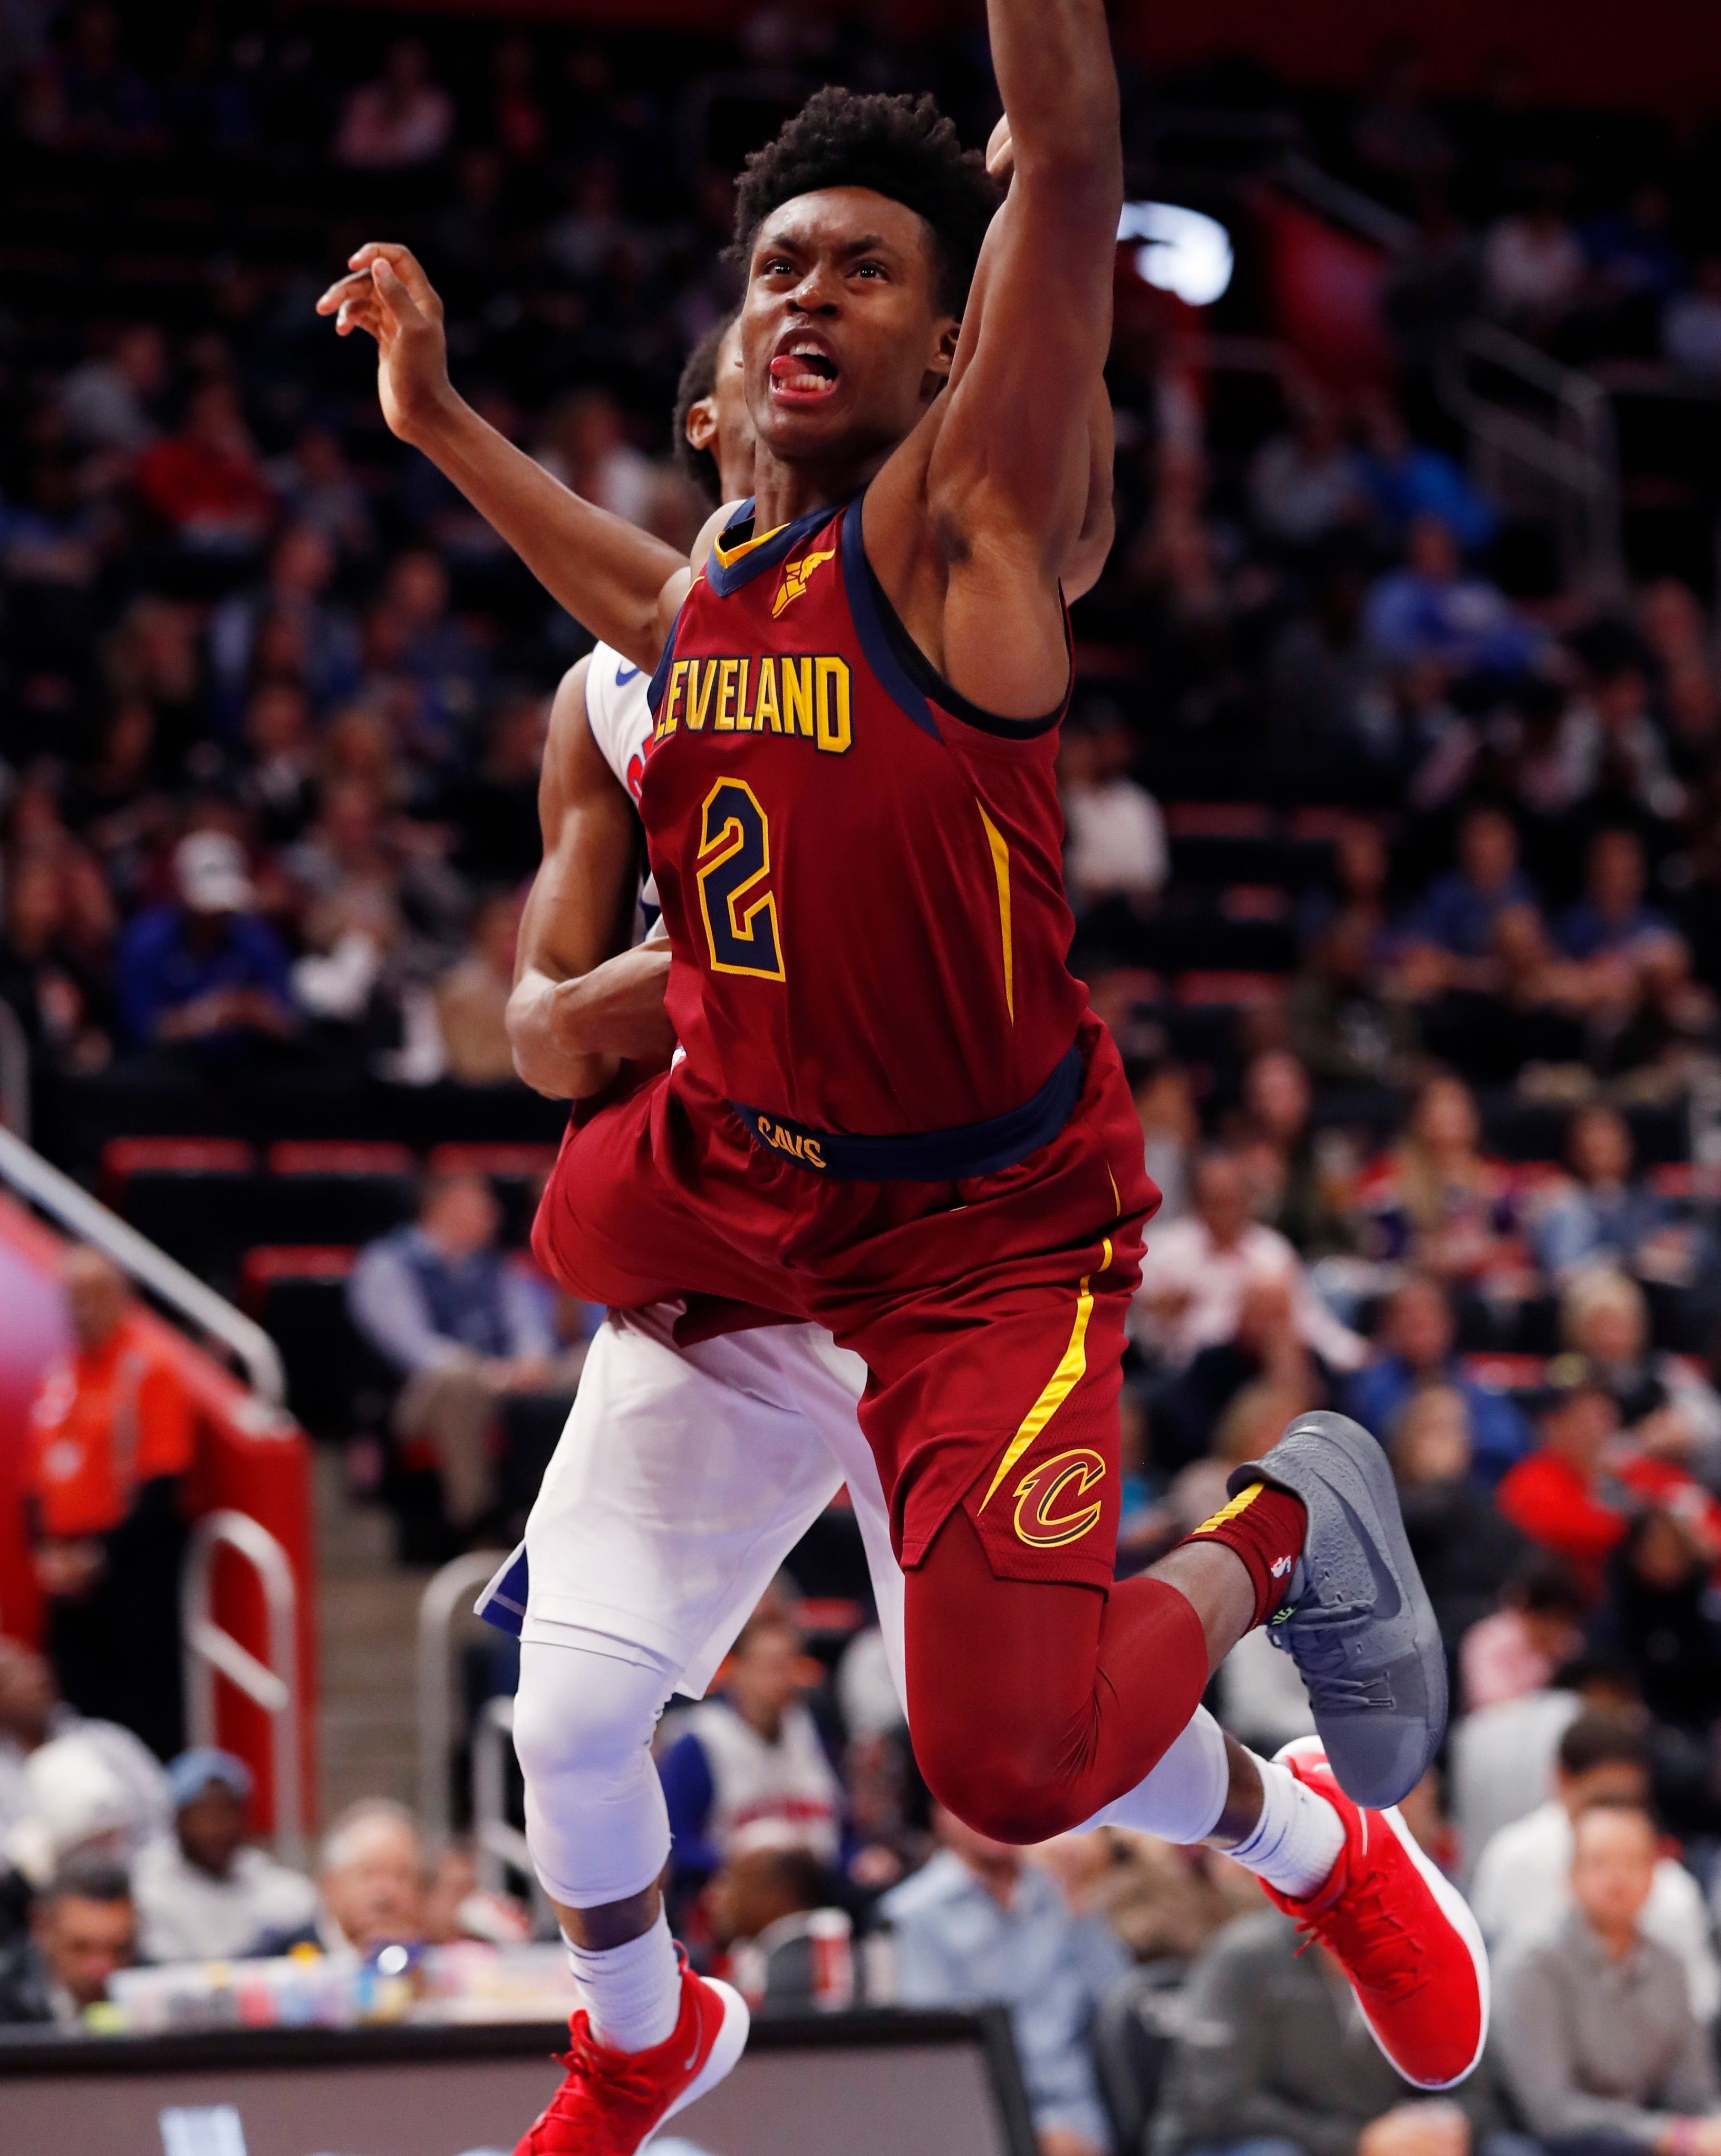 Cleveland Cavaliers guard Collin Sexton (2) is fouled by Detroit Pistons guard Ish Smith during the second half.